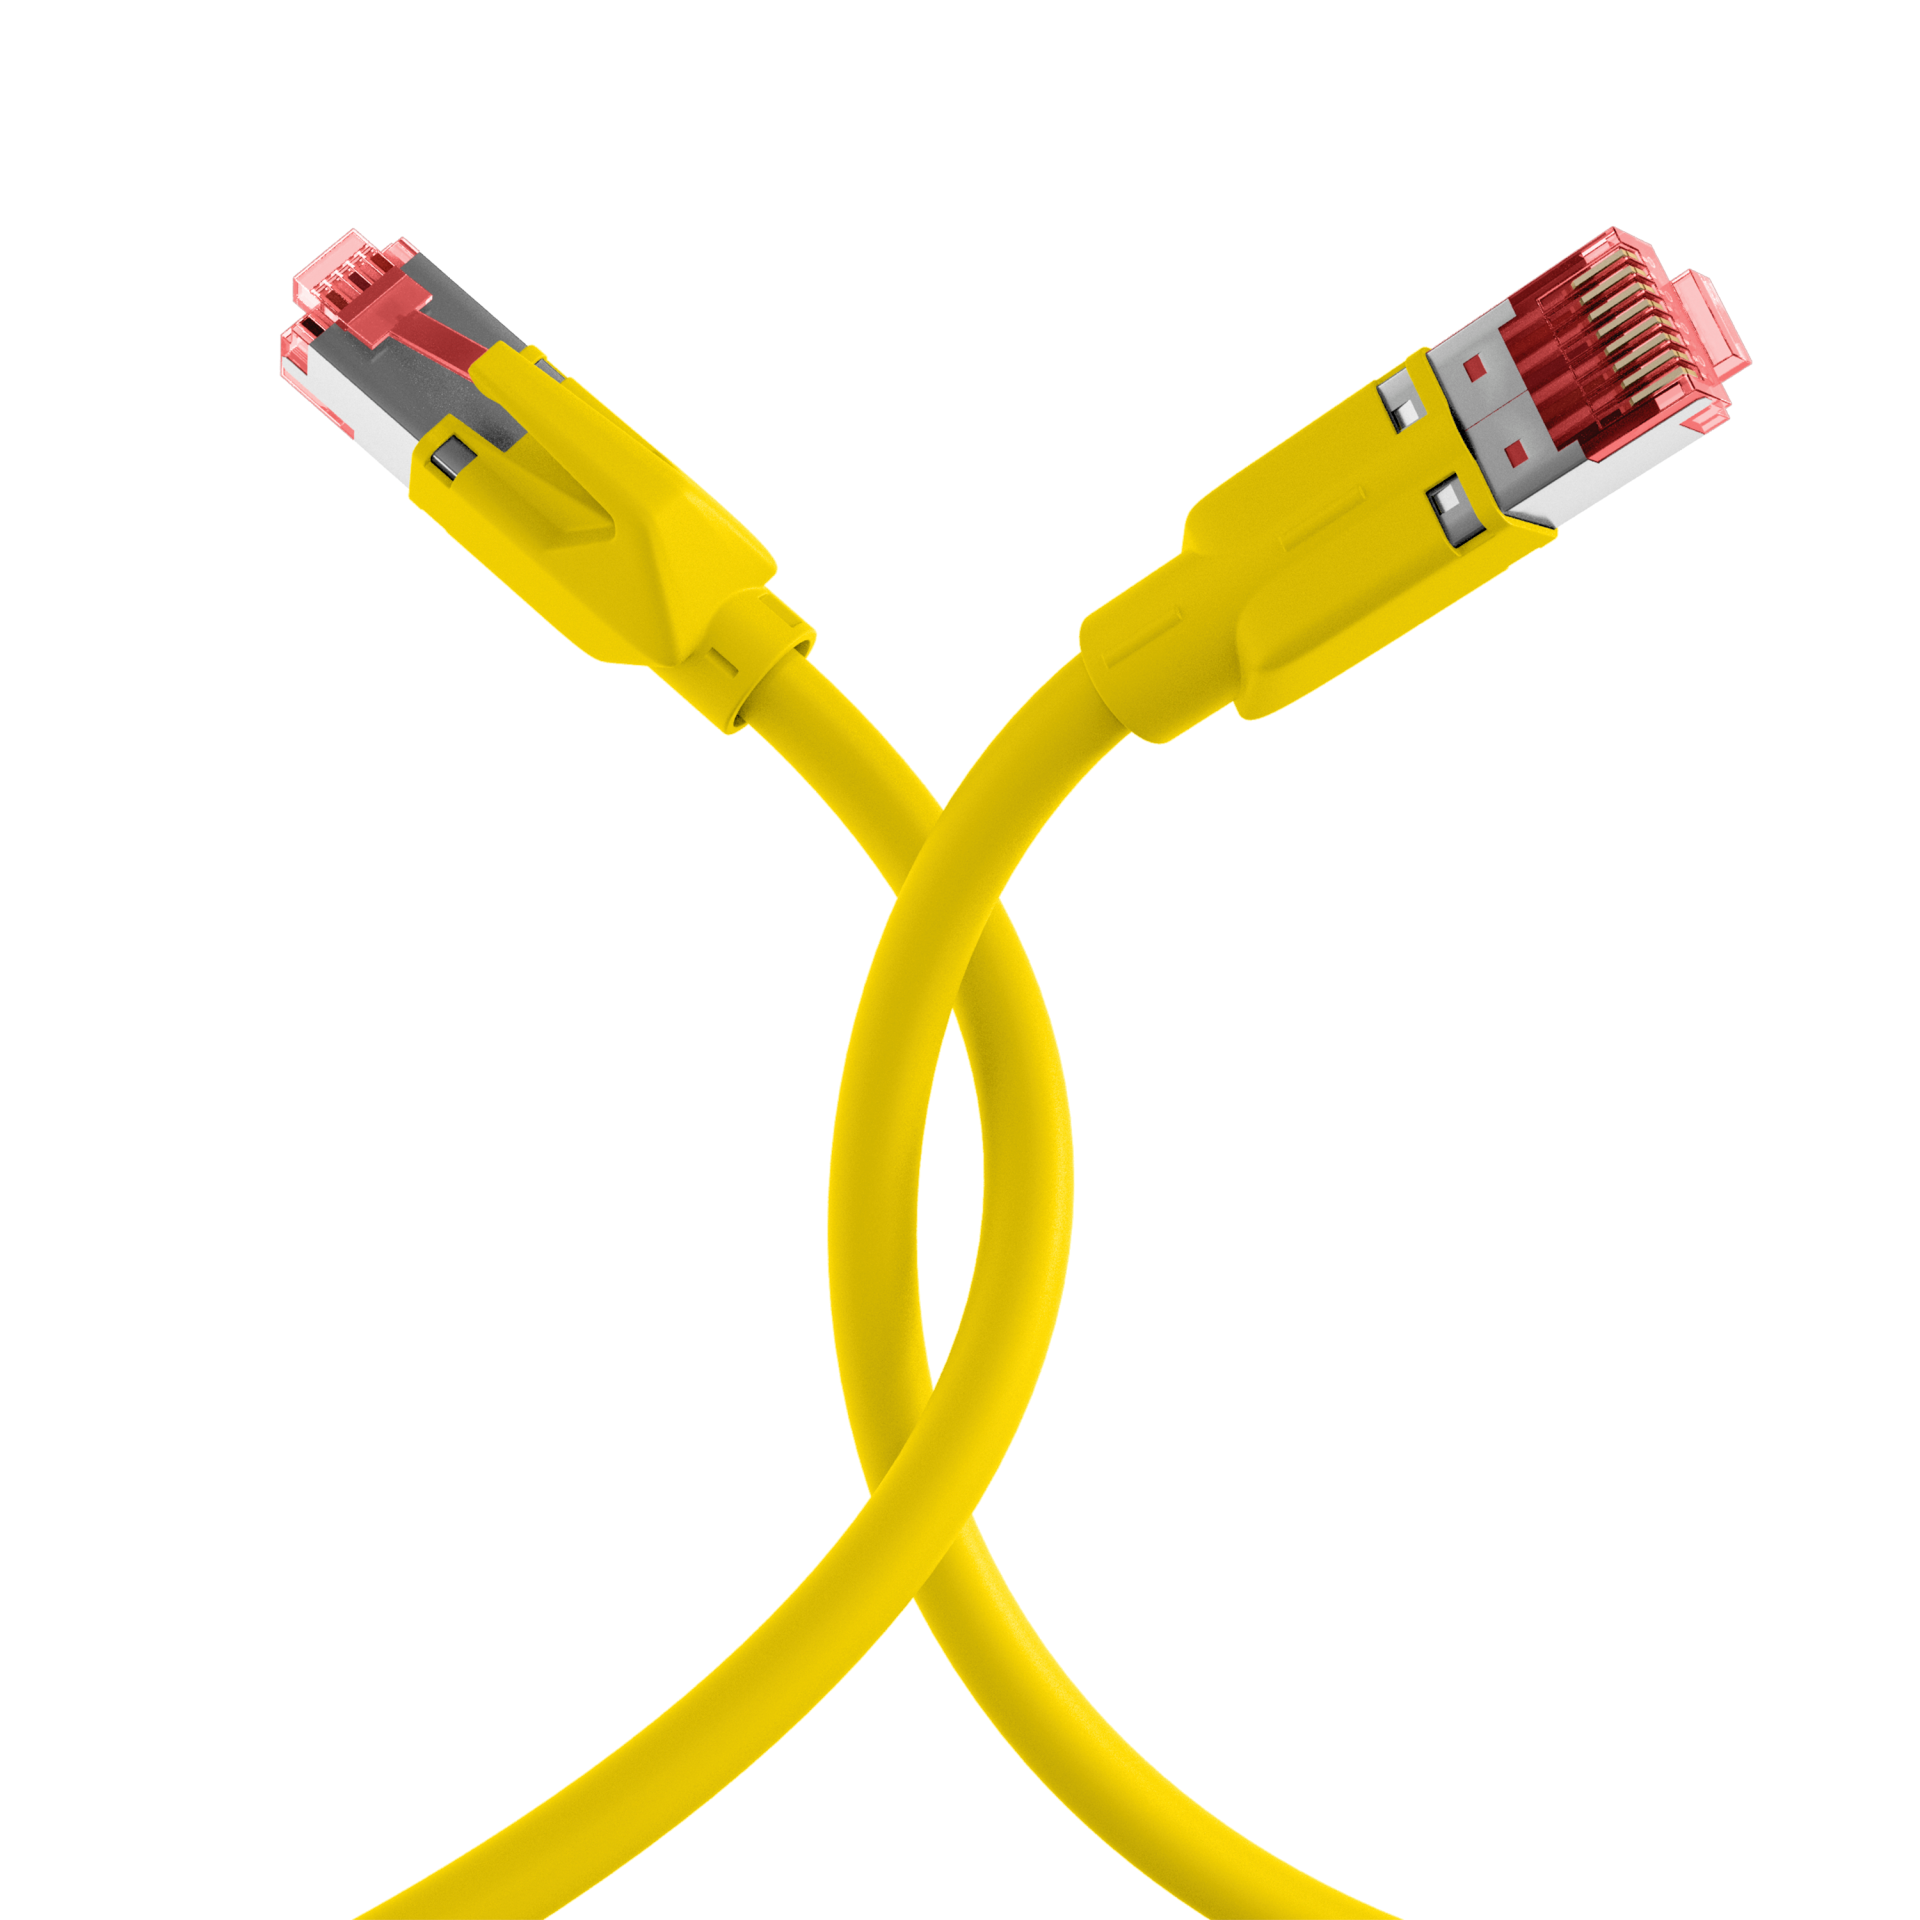 RJ45 Patch Cord Cat.5e S/UTP PUR TM21 for drag chains yellow 1m